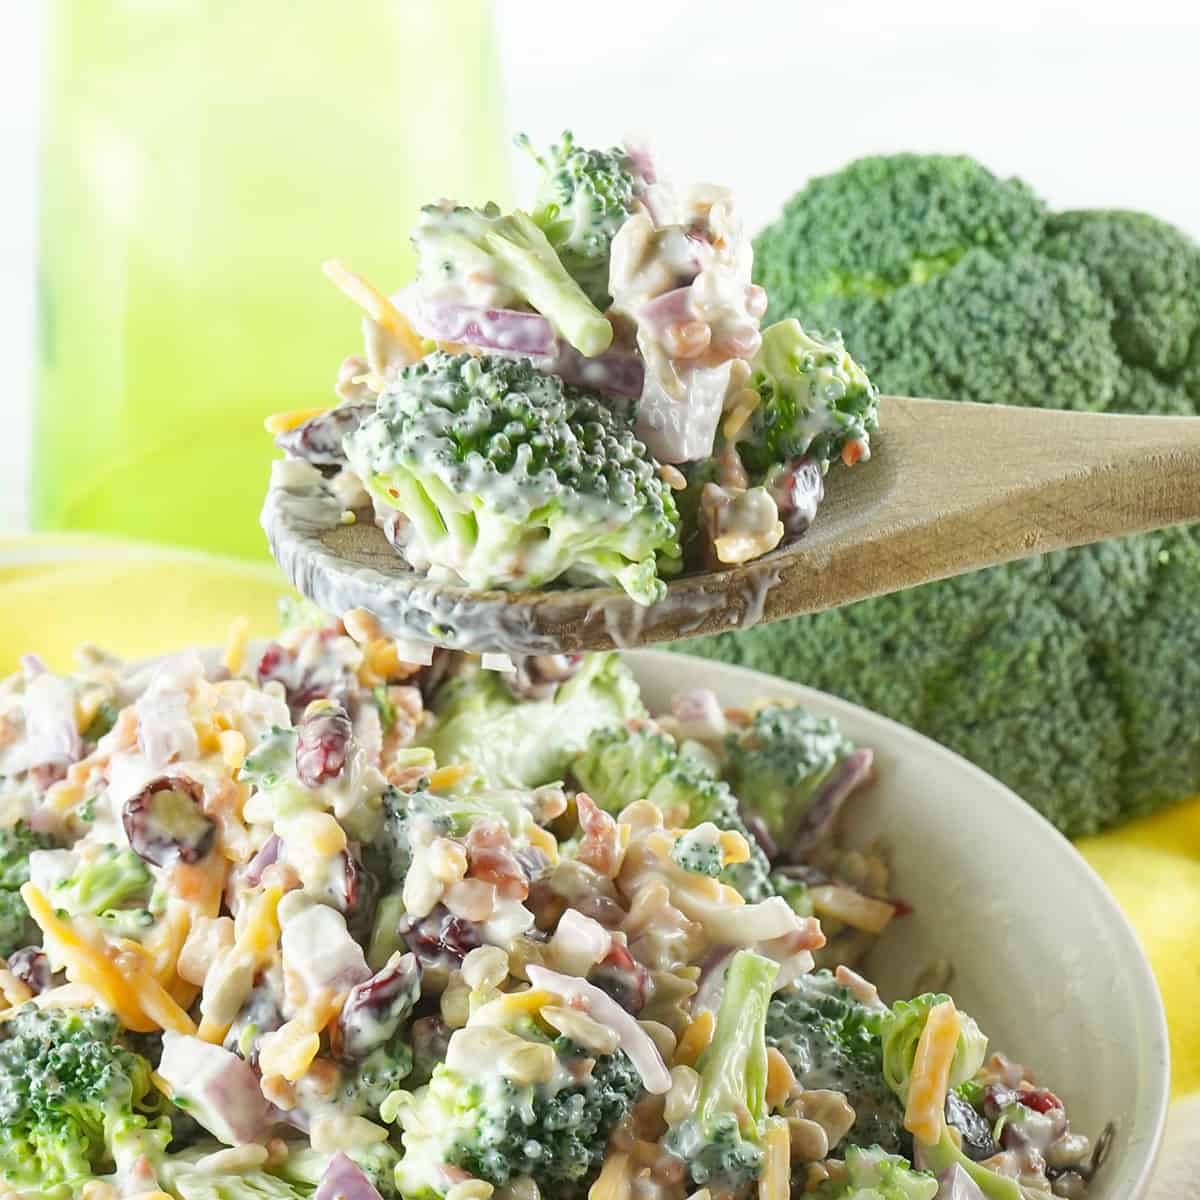 A wooden spoon holding a bite of broccoli salad.